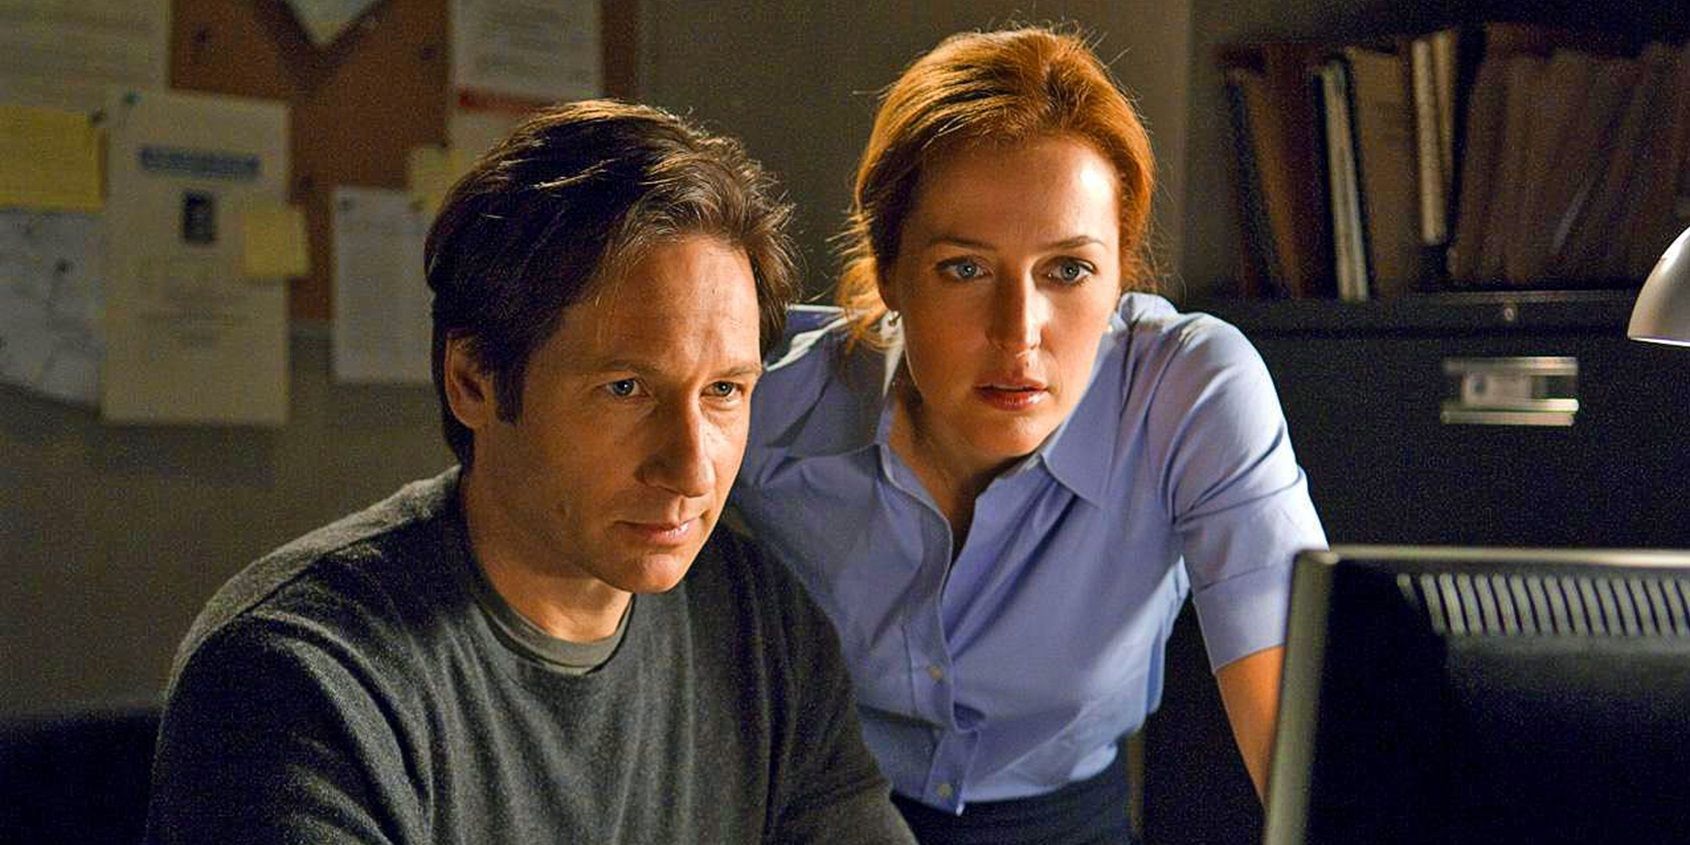 Mulder (David Duchovny) and Scully (Gillian Anderson) looking at a computer in The X-Files